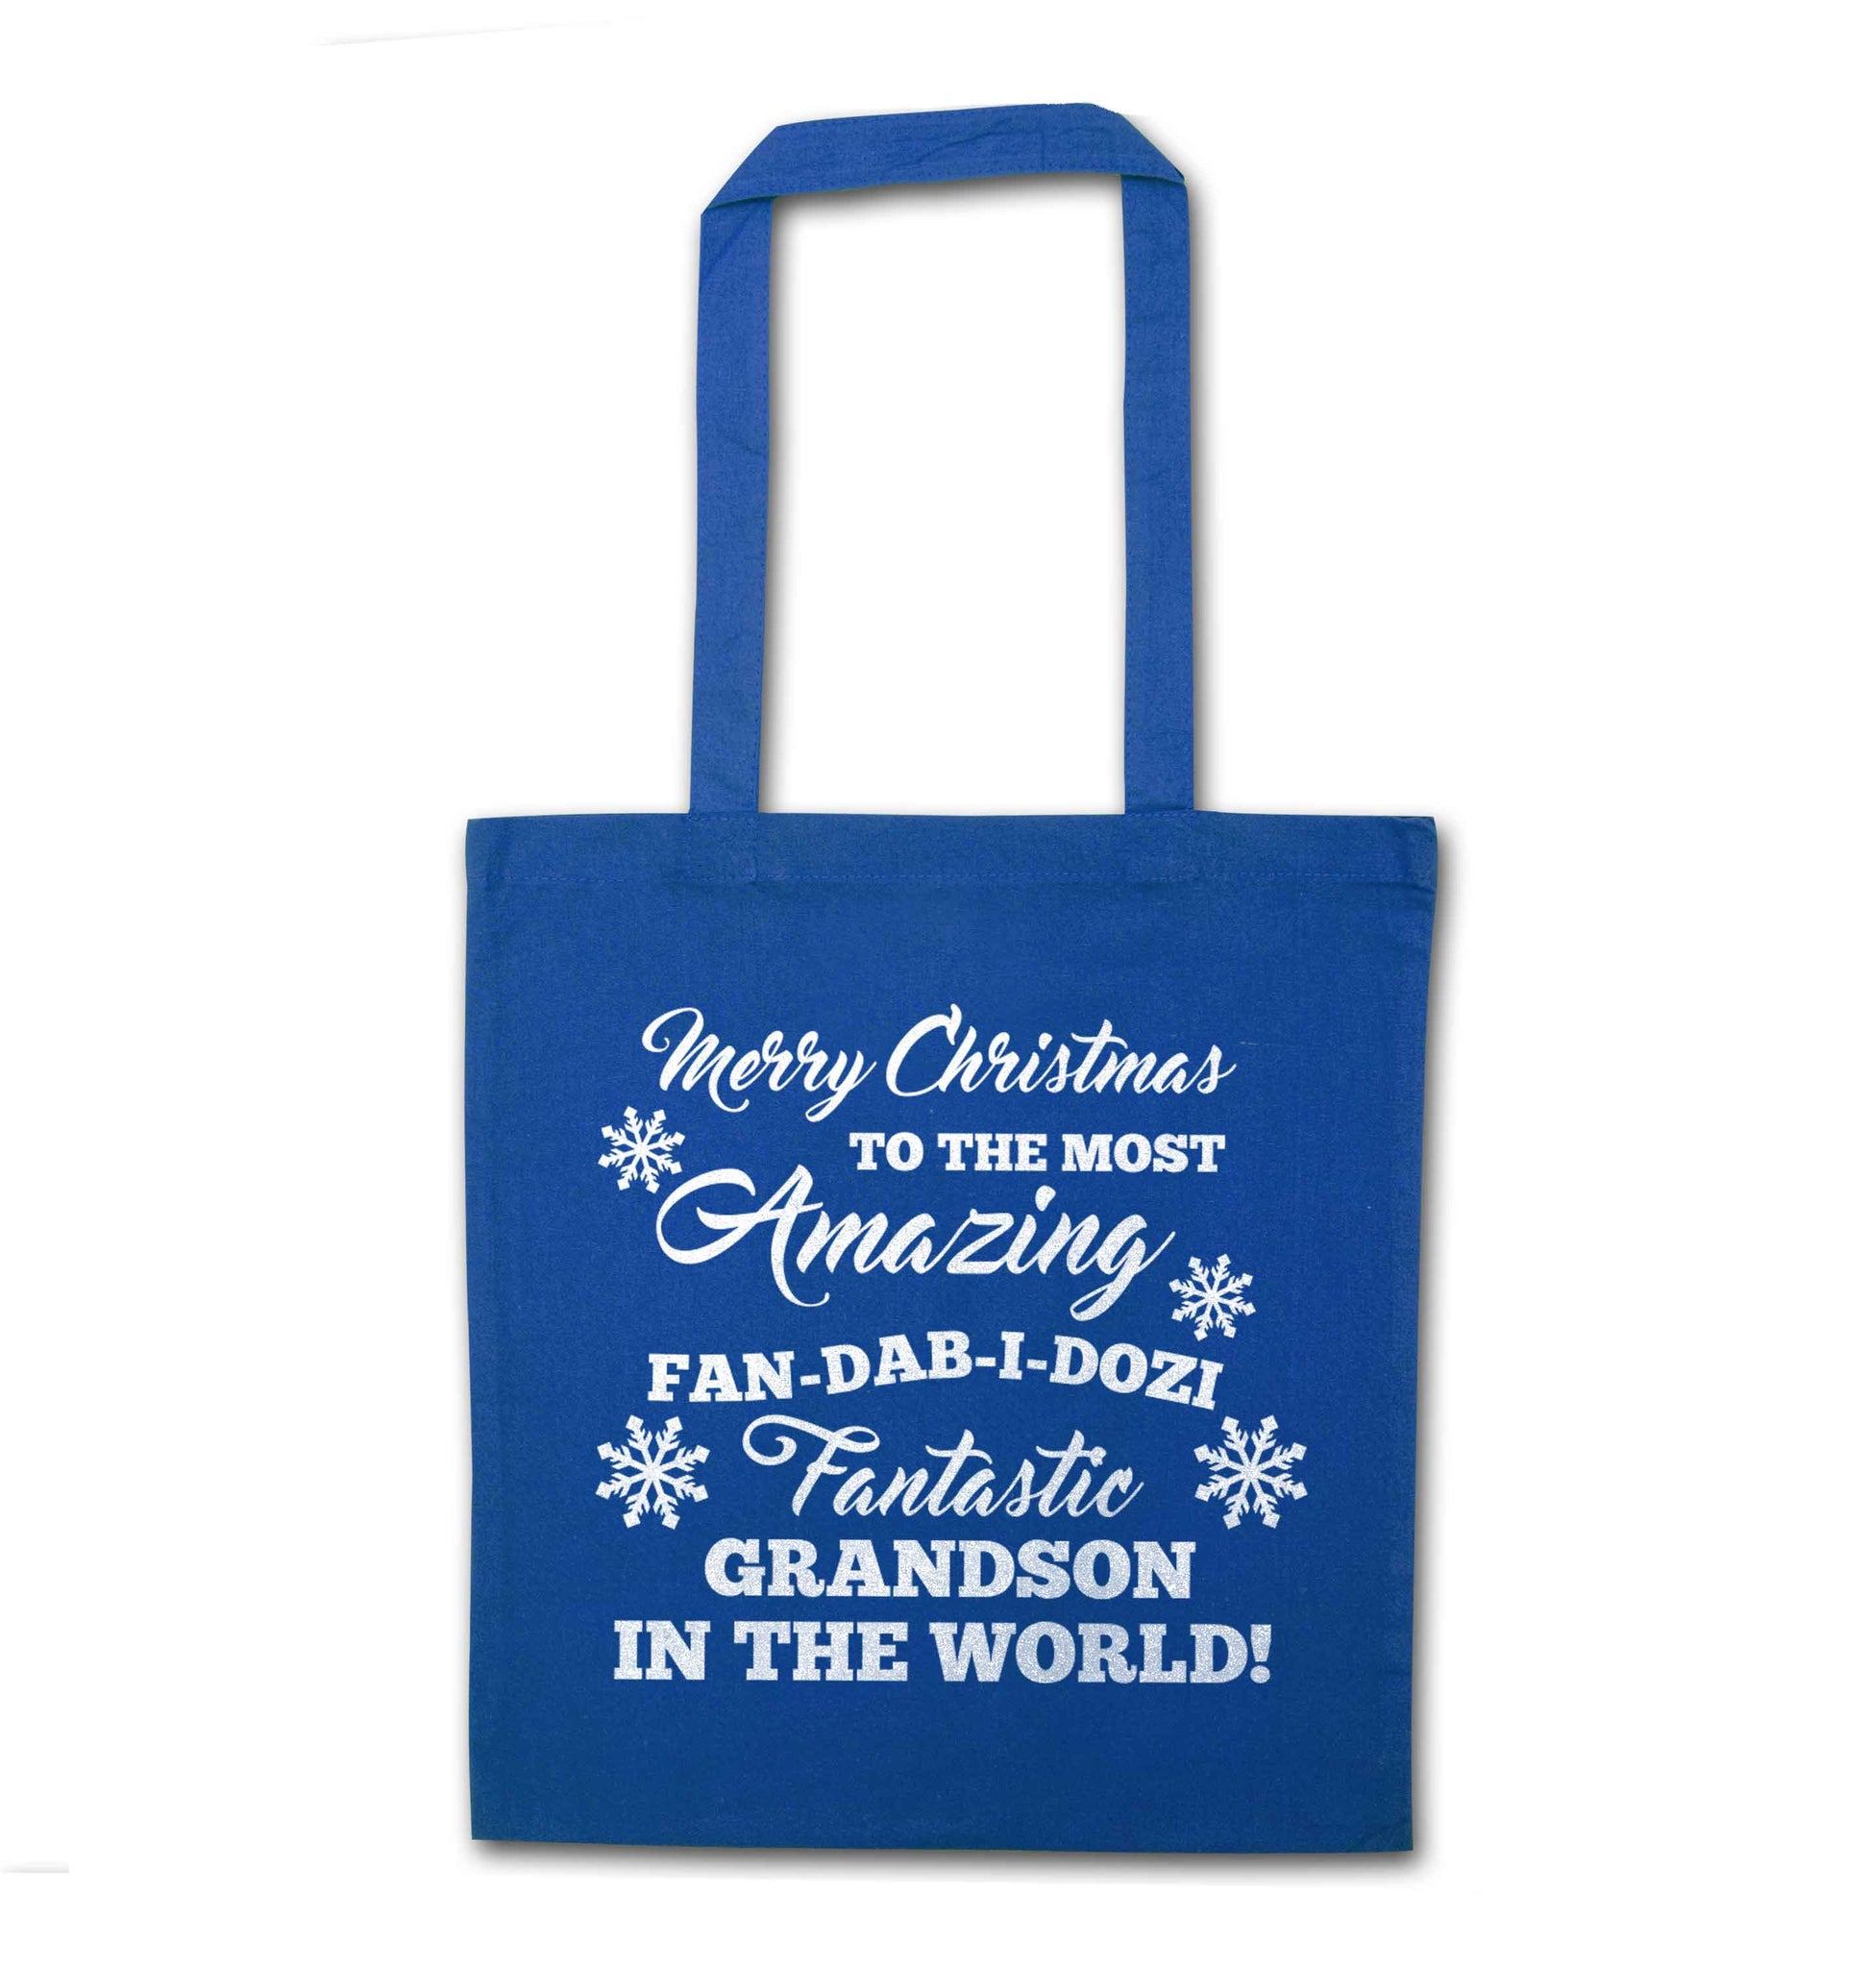 Merry Christmas to the most amazing fan-dab-i-dozi fantasic Grandson in the world blue tote bag